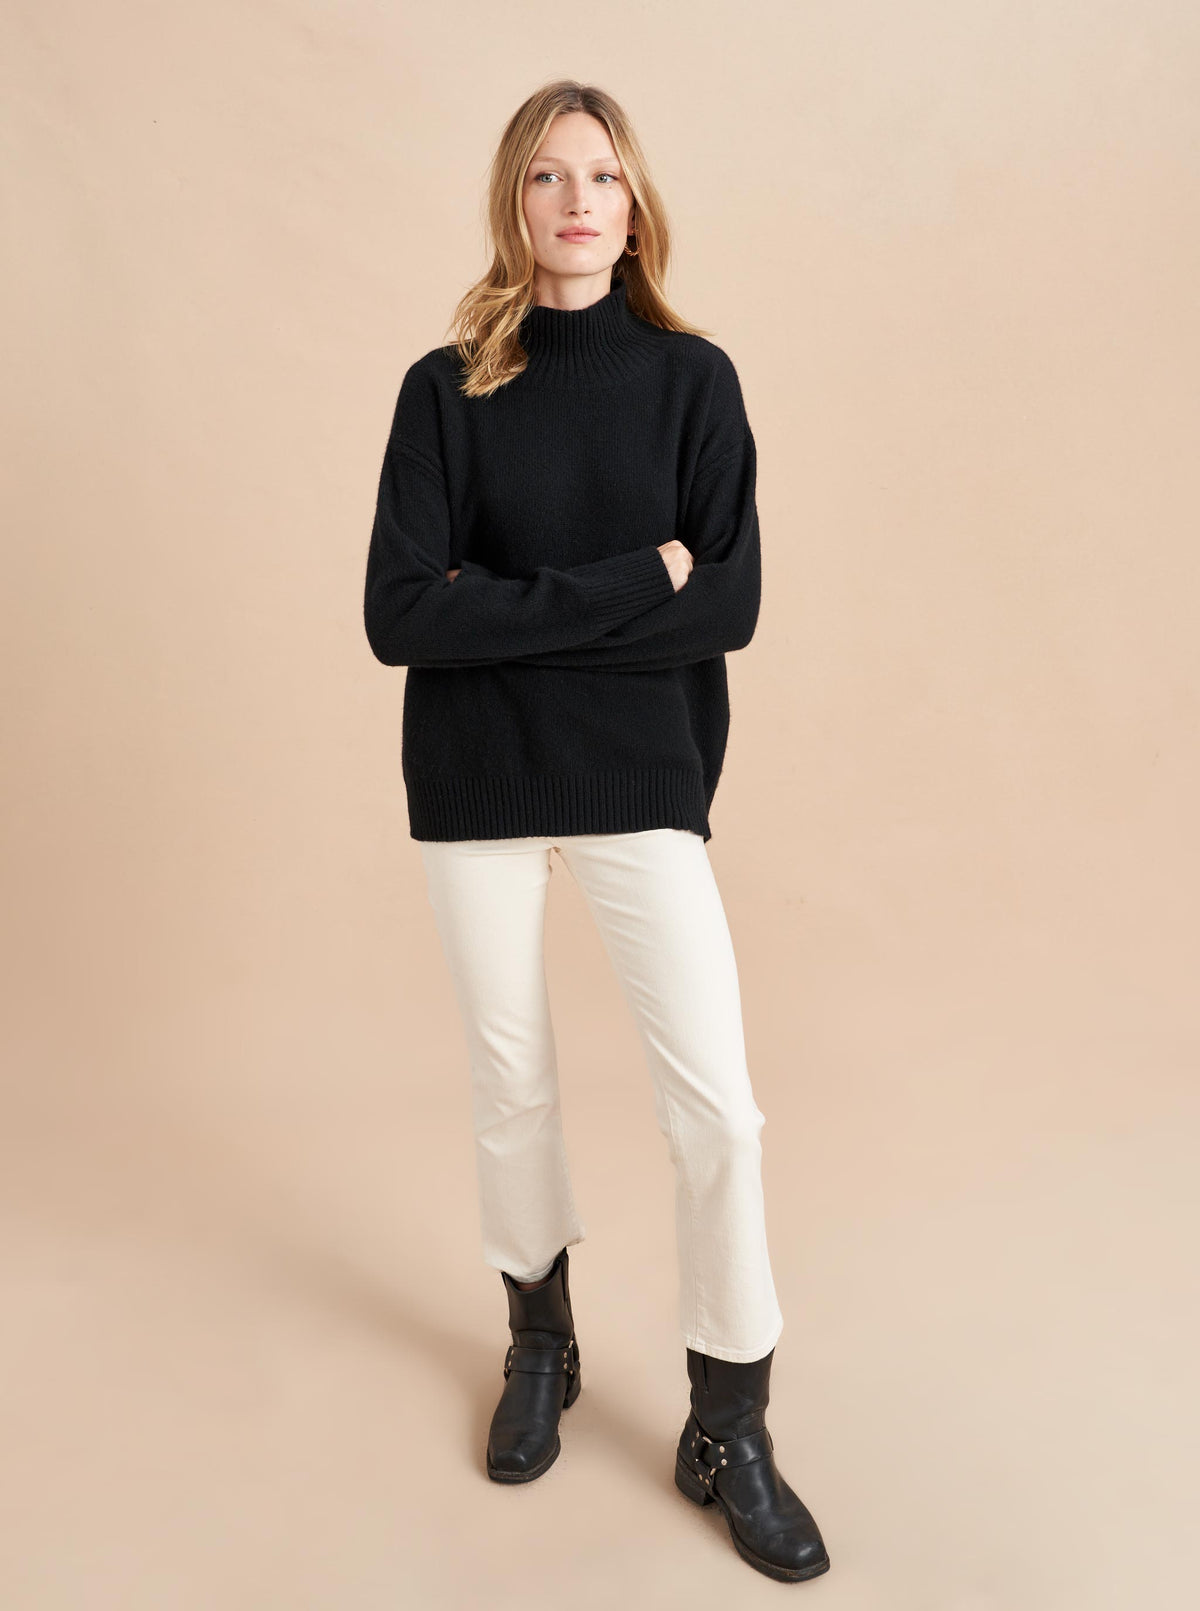 Our co-founder Valerie Macaulay's favorite turtleneck, this oversized sweater in buttery soft recycled cashmere, is chic with winter white, excellent over your favorite denim and a no brainer with a classic wide leg trouser. This knit was made to be your go-to season after season.